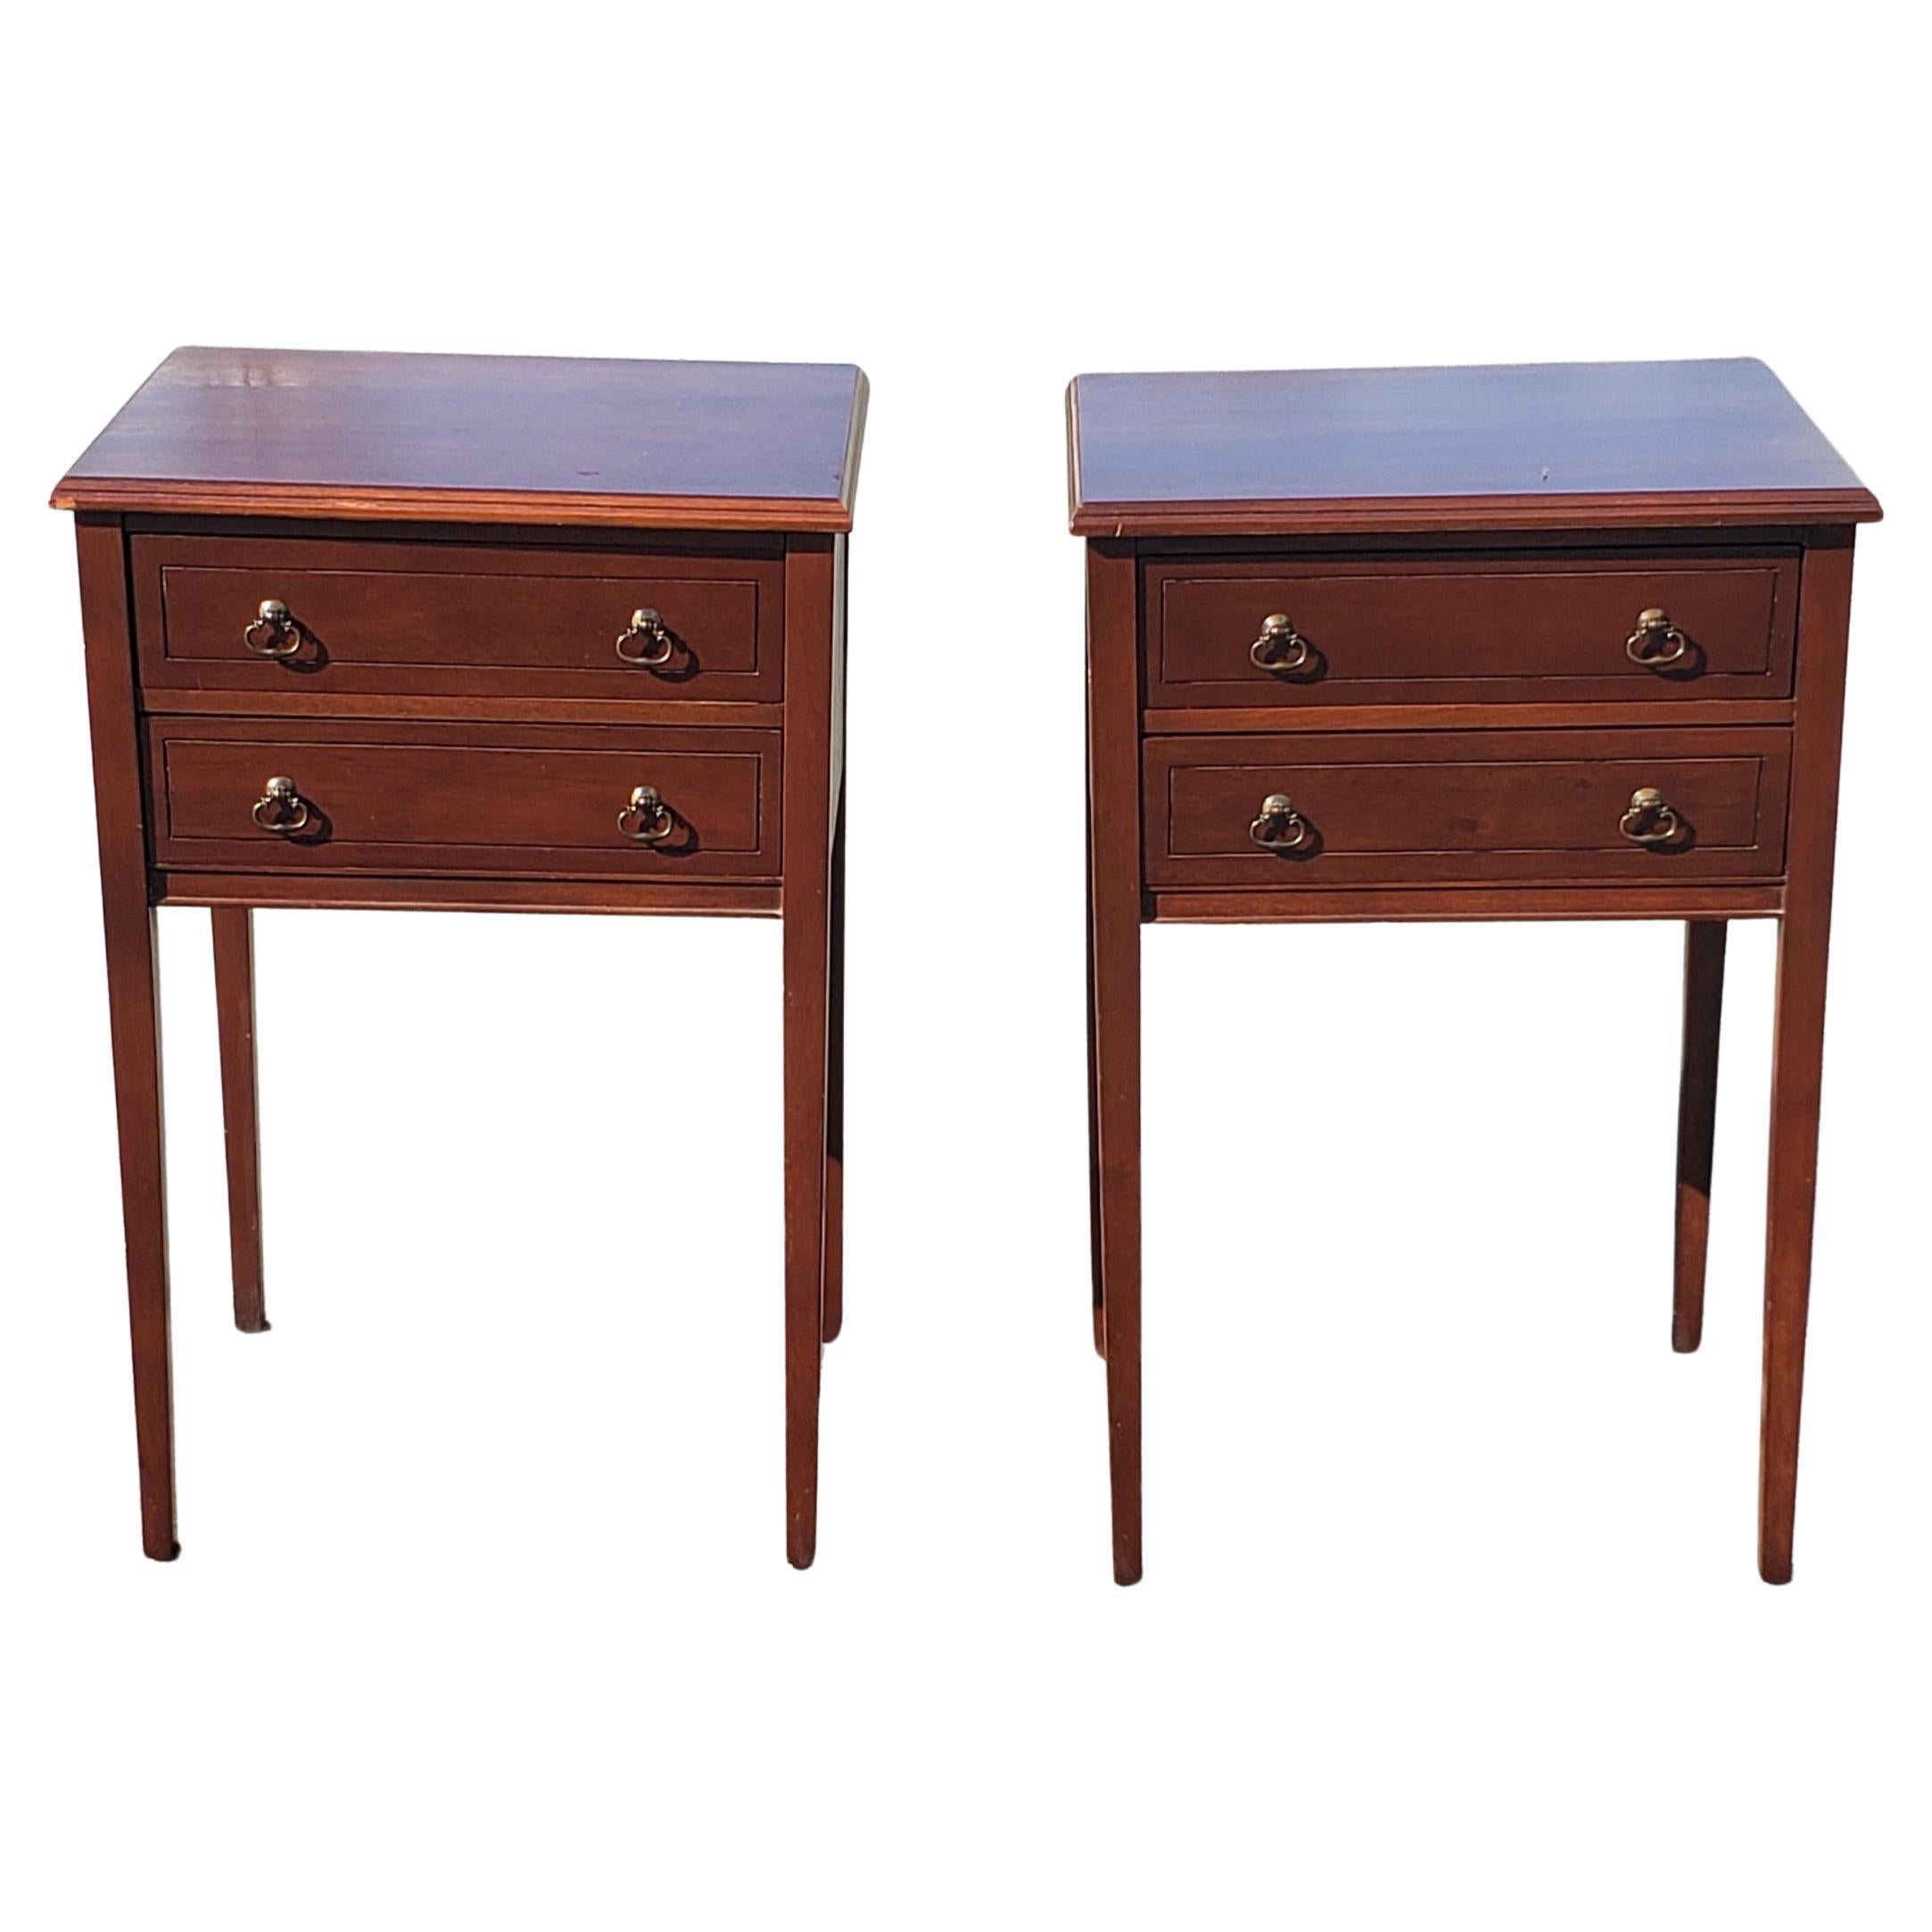 1940s Regency Two-Drawers Mahogany Side Tables by Mersman Furniture, a Pair